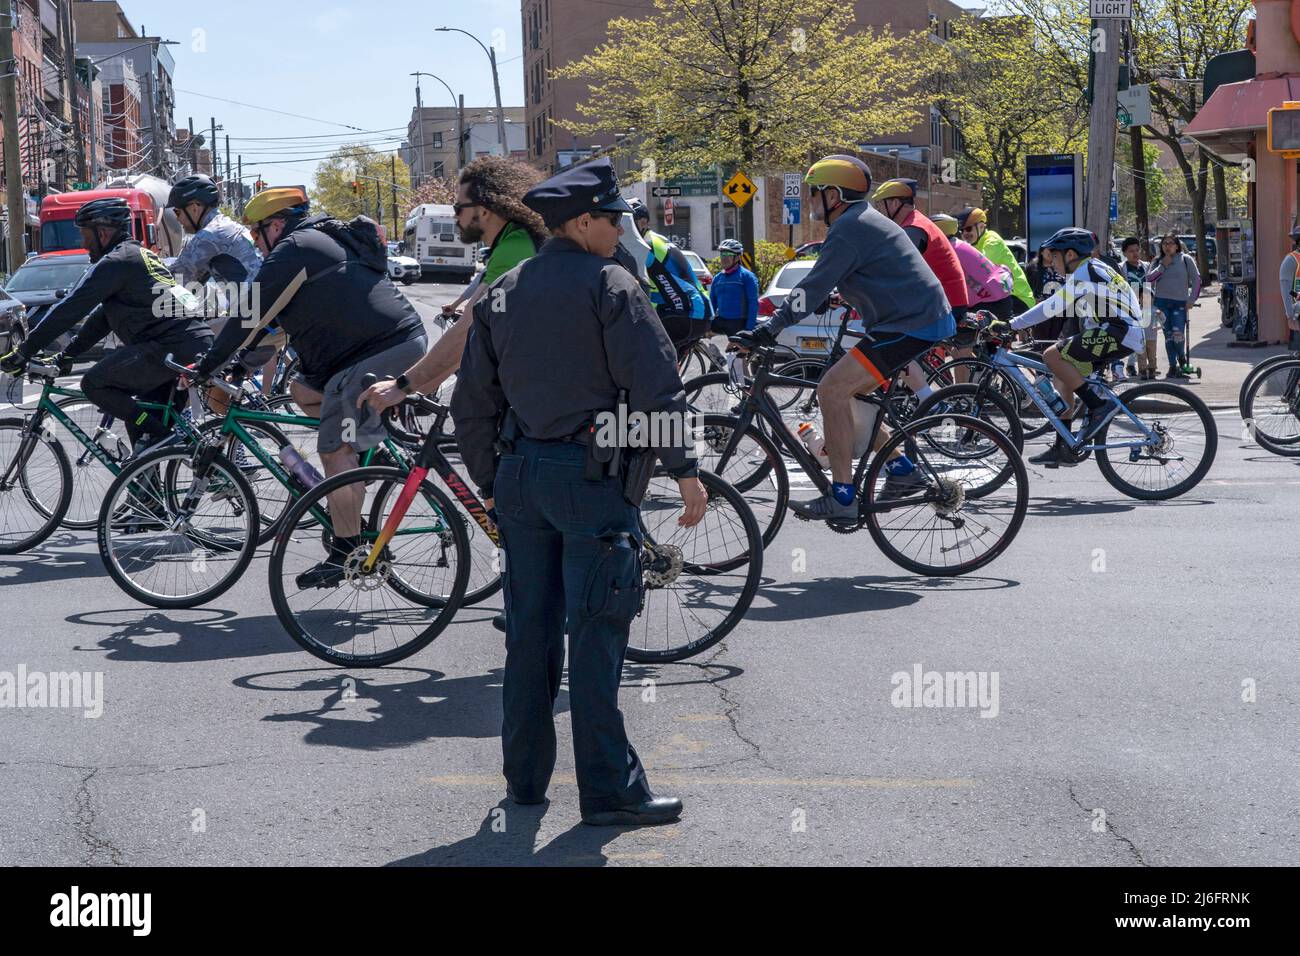 NEW YORK, NY - MAY 01: New York Police Department (NYPD) officer stops automobile traffic as cyclers spin their wheels in the annual Five-Borough Bike Tour on May 01, 2022in New York City. Thousands of cyclists of all skill levels ride 40 miles through every borough of New York City on streets totally free of cars. The massive cycling event also means significant road closures throughout the Big Apple. Credit: Ron Adar/Alamy Live News Stock Photo